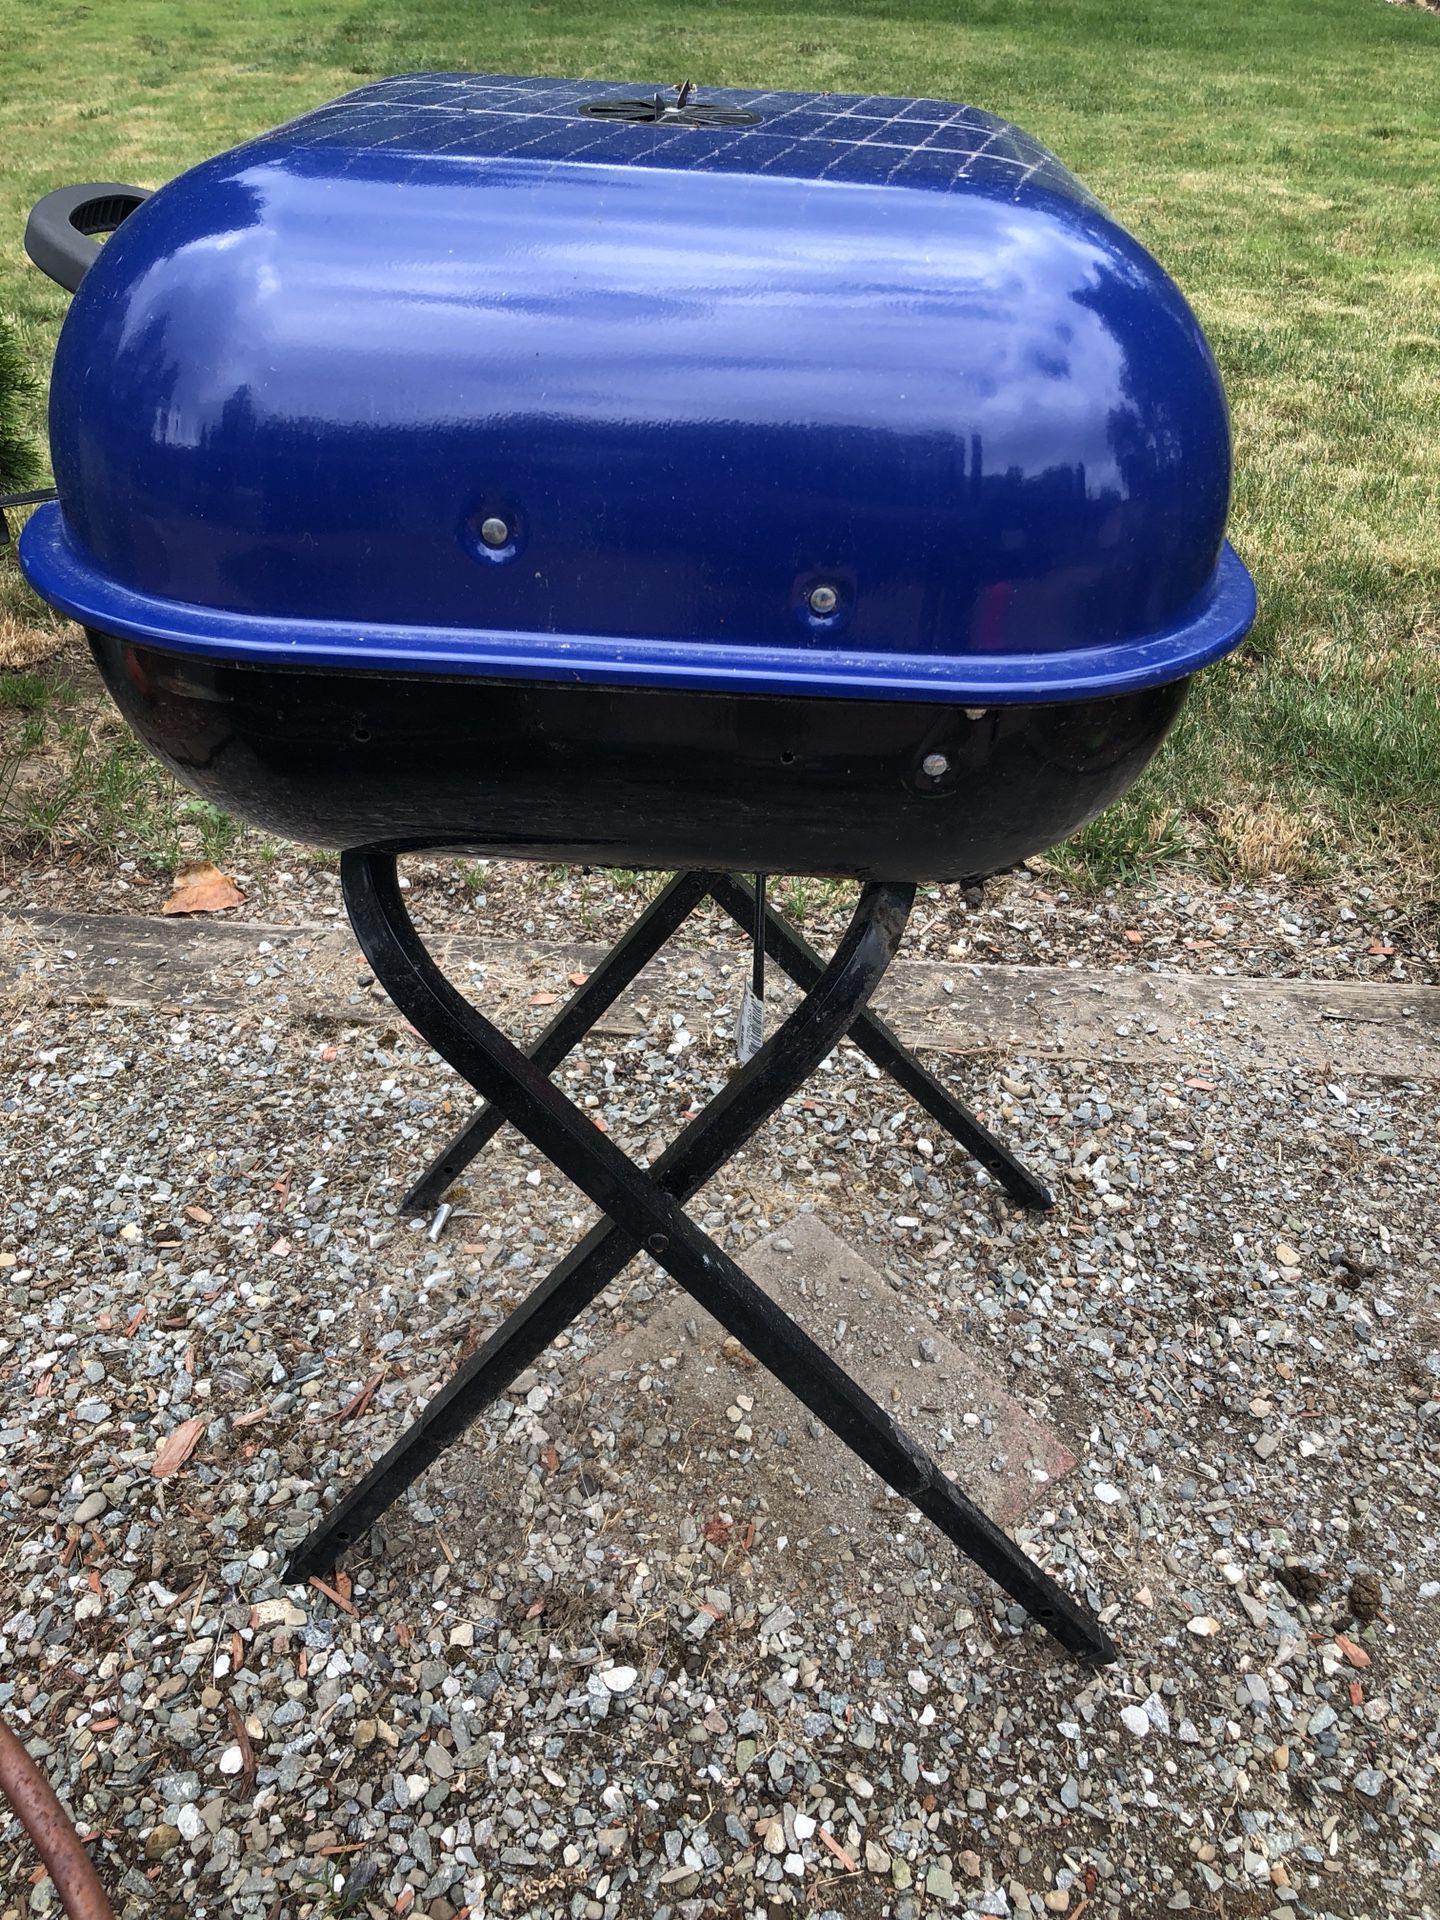 Aussie charcoal grill